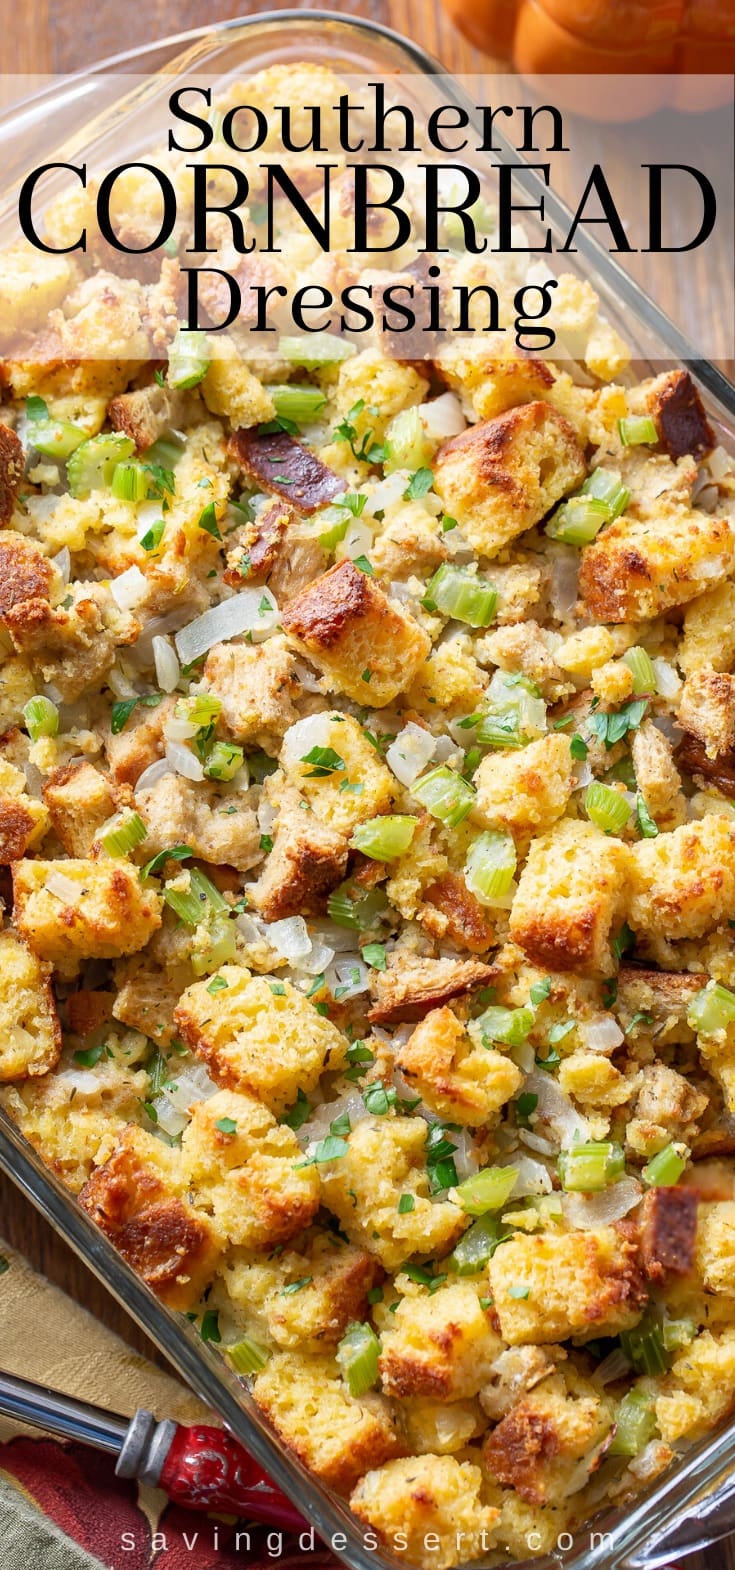 A casserole with Southern Cornbread Dressing